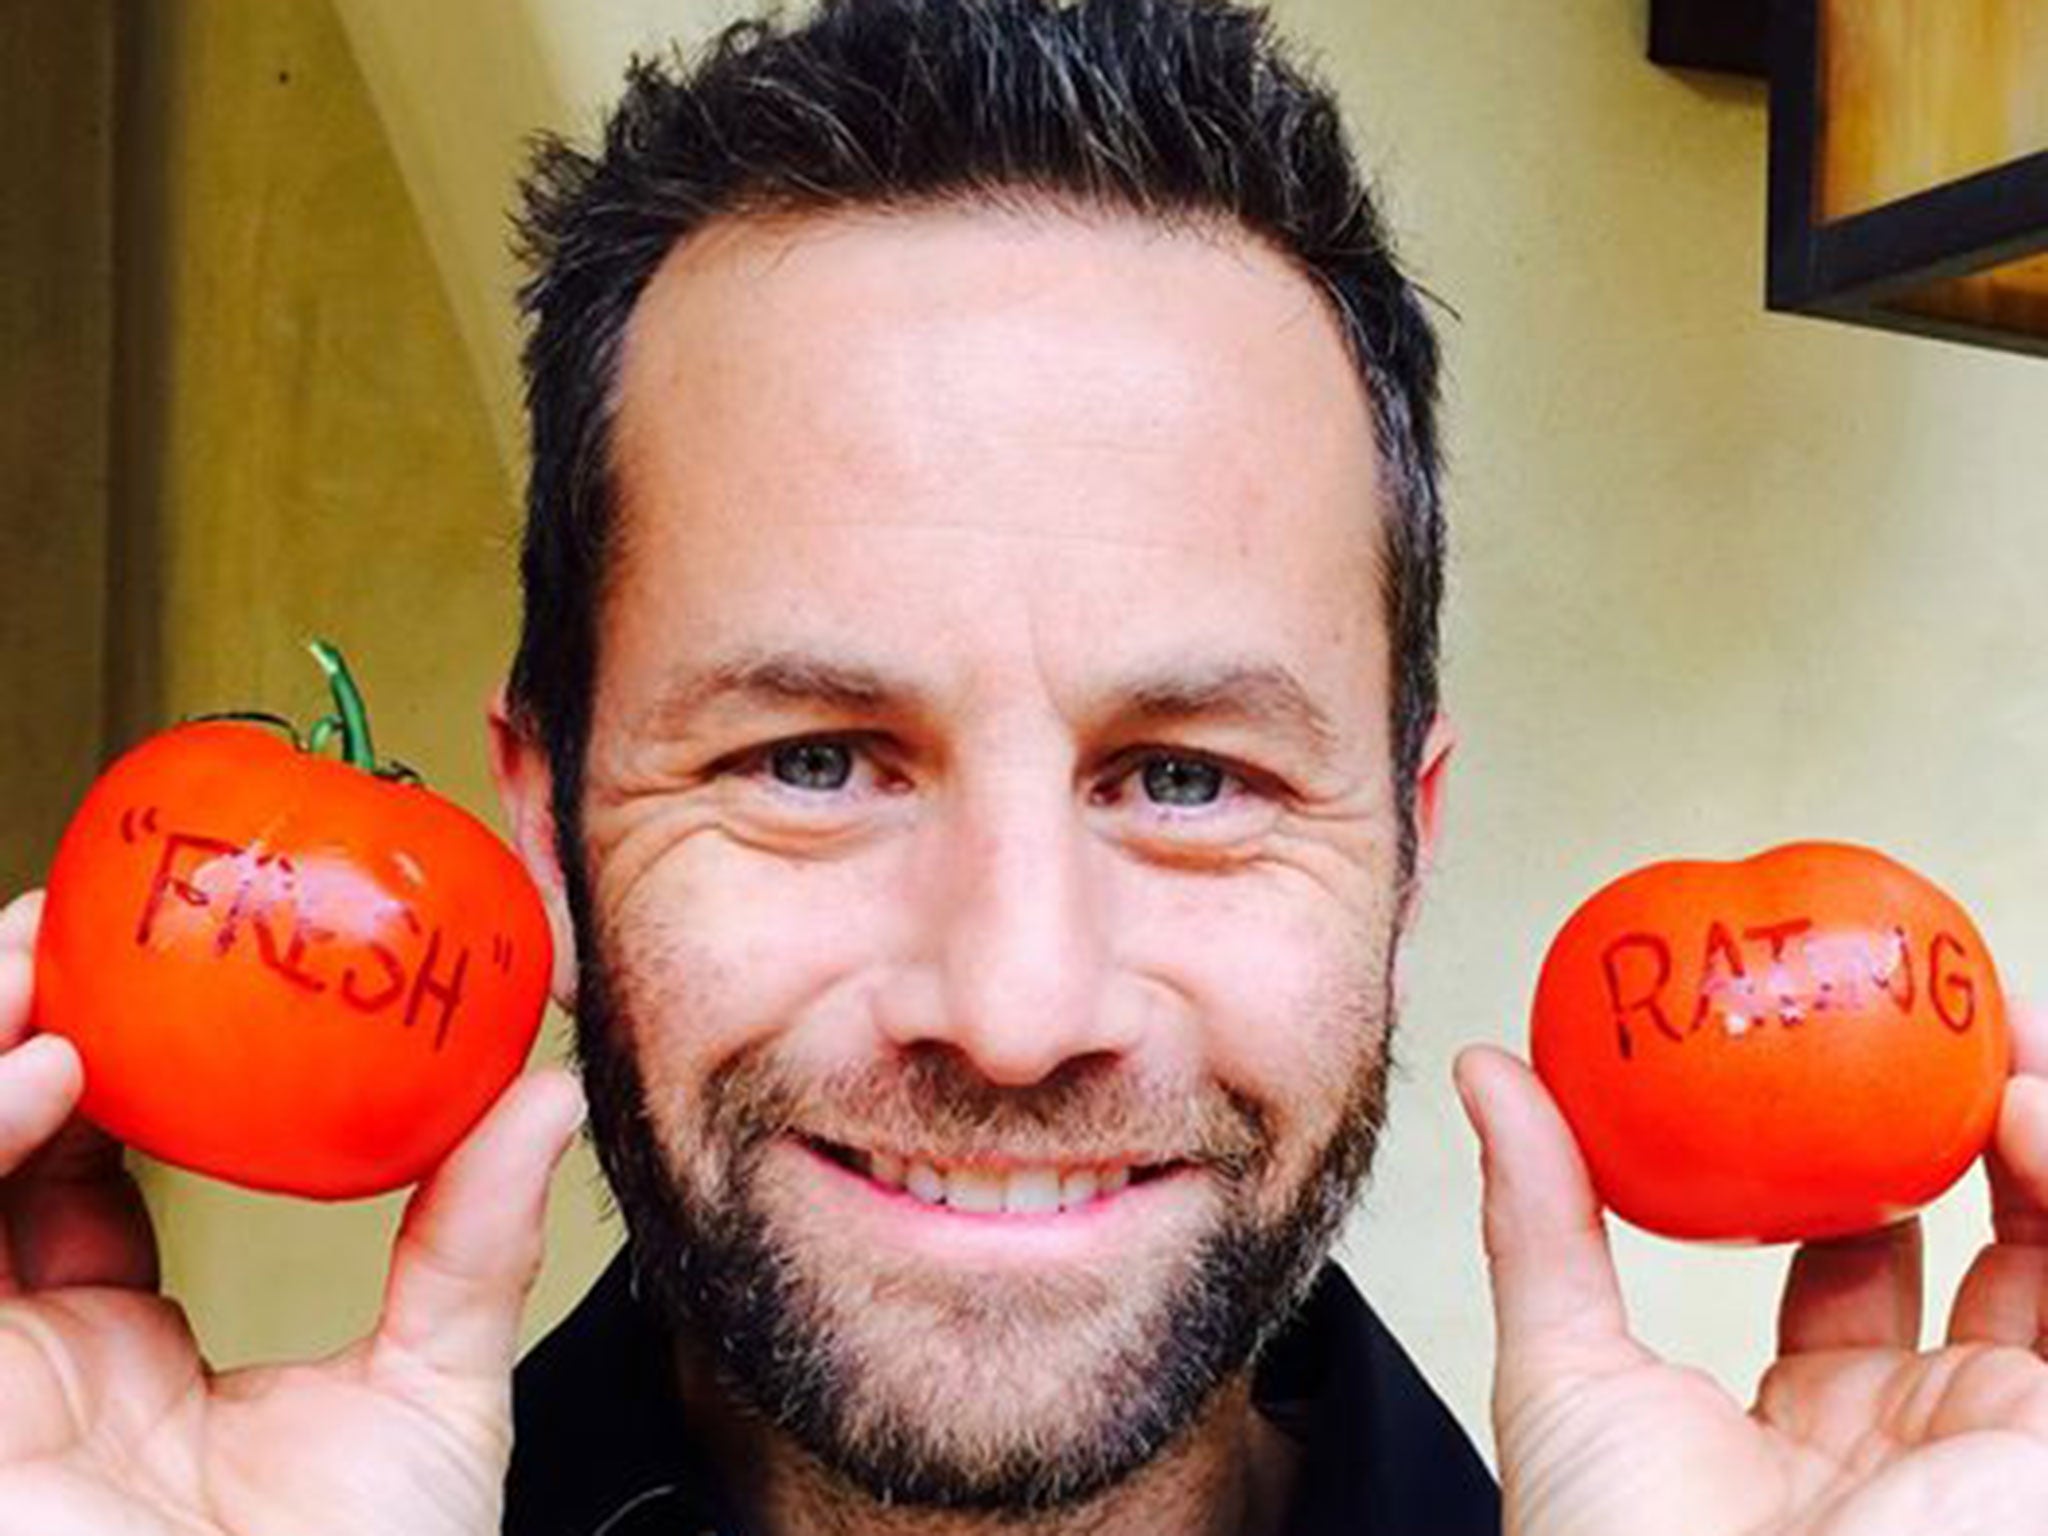 Kirk Cameron is begging his Facebook fans to give him positive reviews